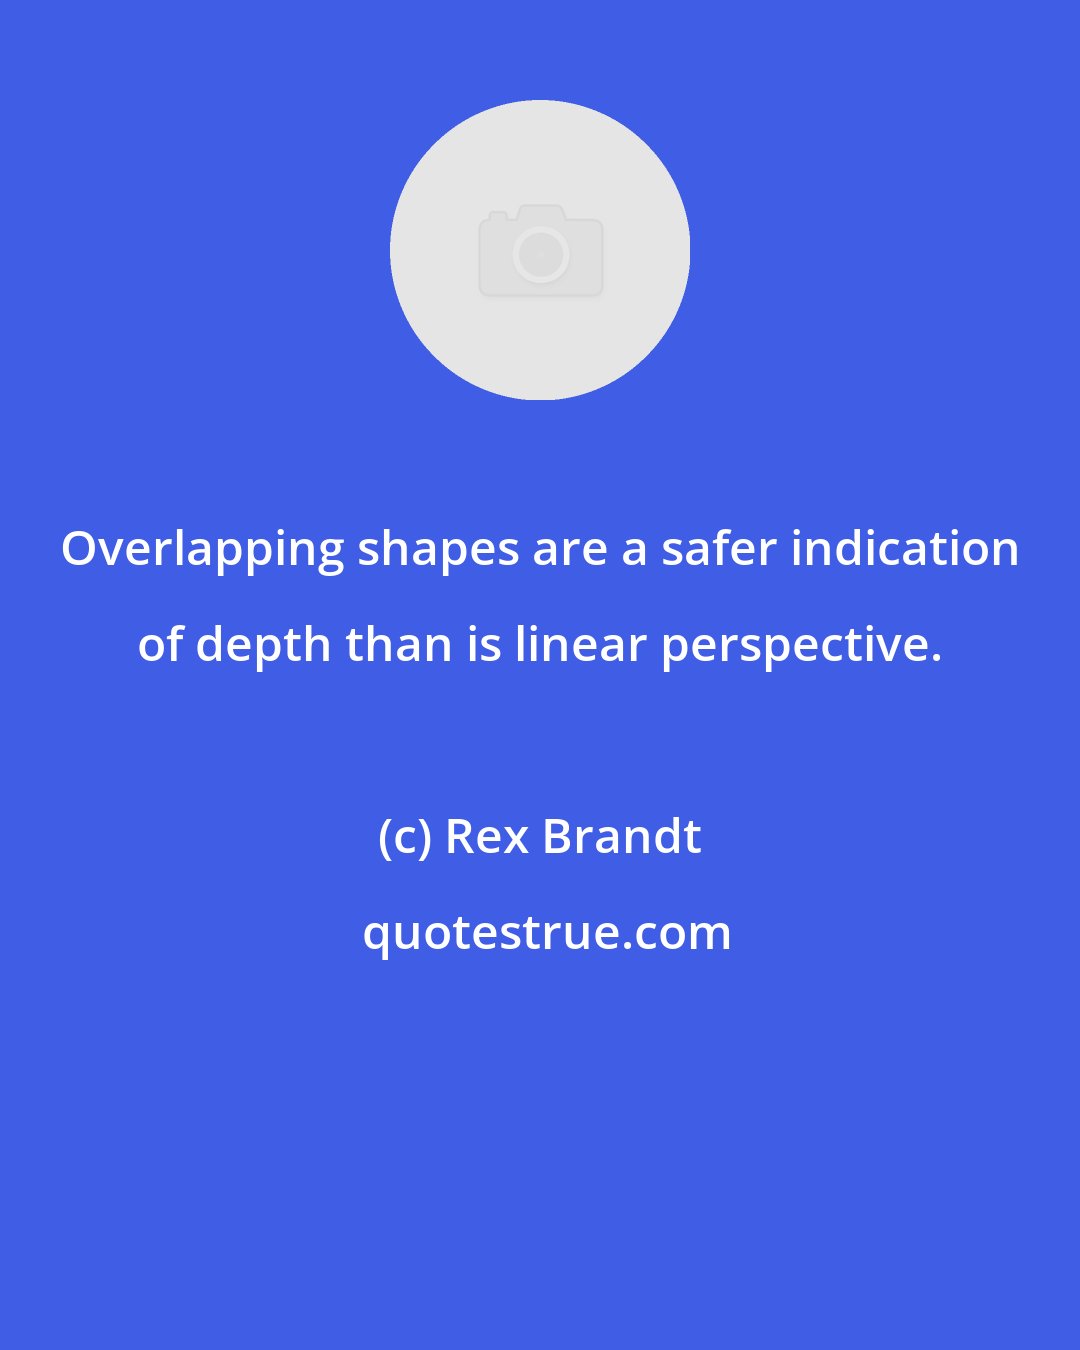 Rex Brandt: Overlapping shapes are a safer indication of depth than is linear perspective.